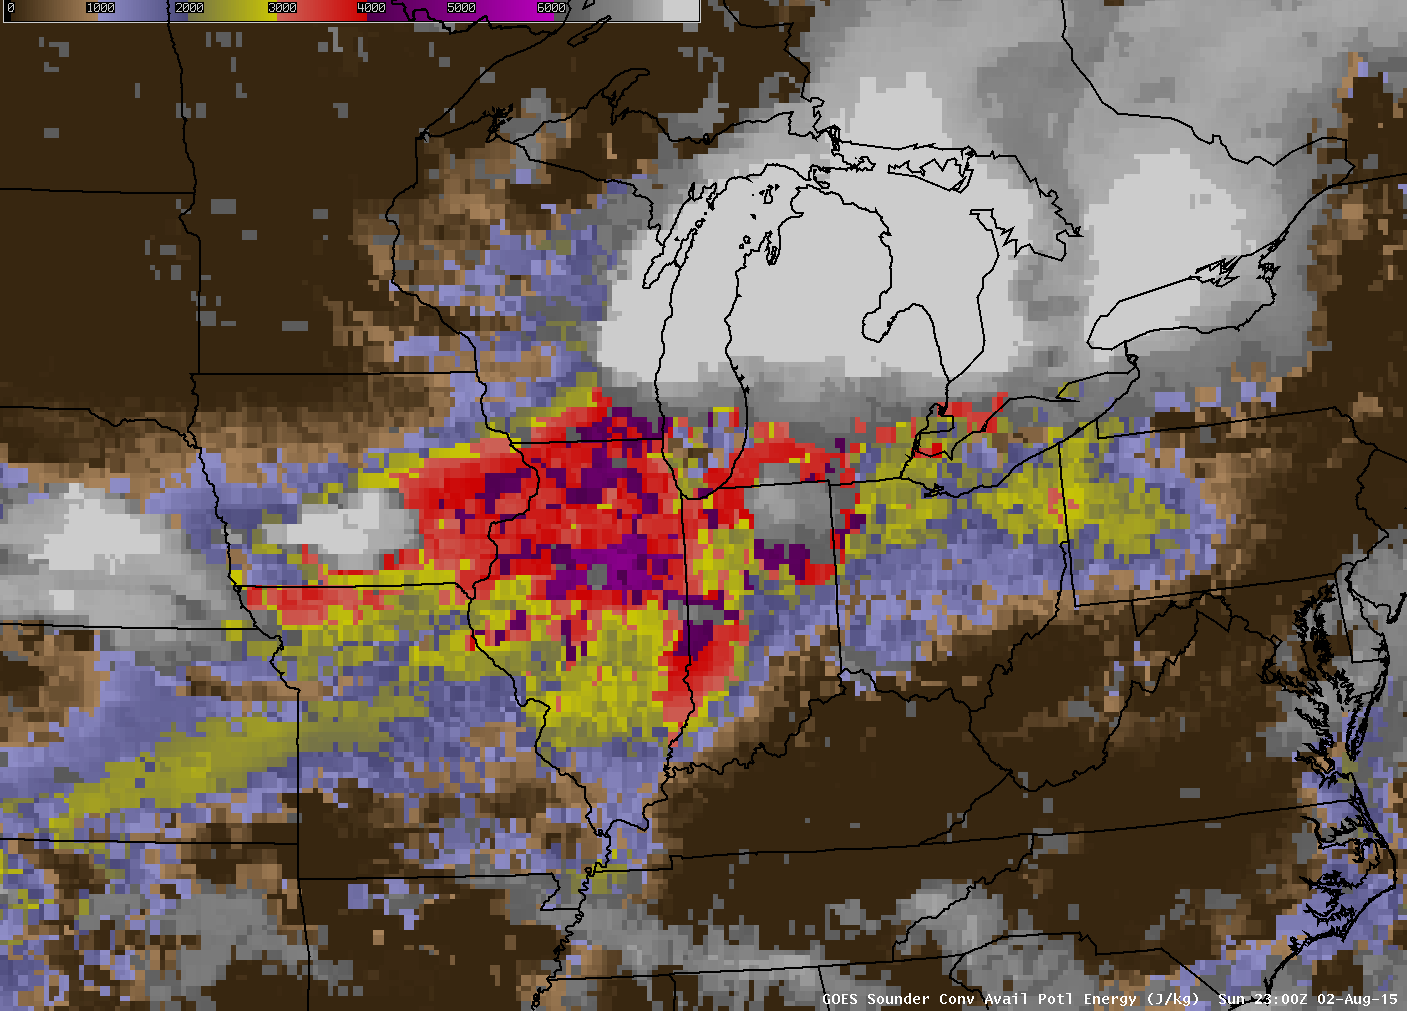 GOES-13 Sounder DPI Convective Available Potential Energy (CAPE), times as indicated  [click to play animation]